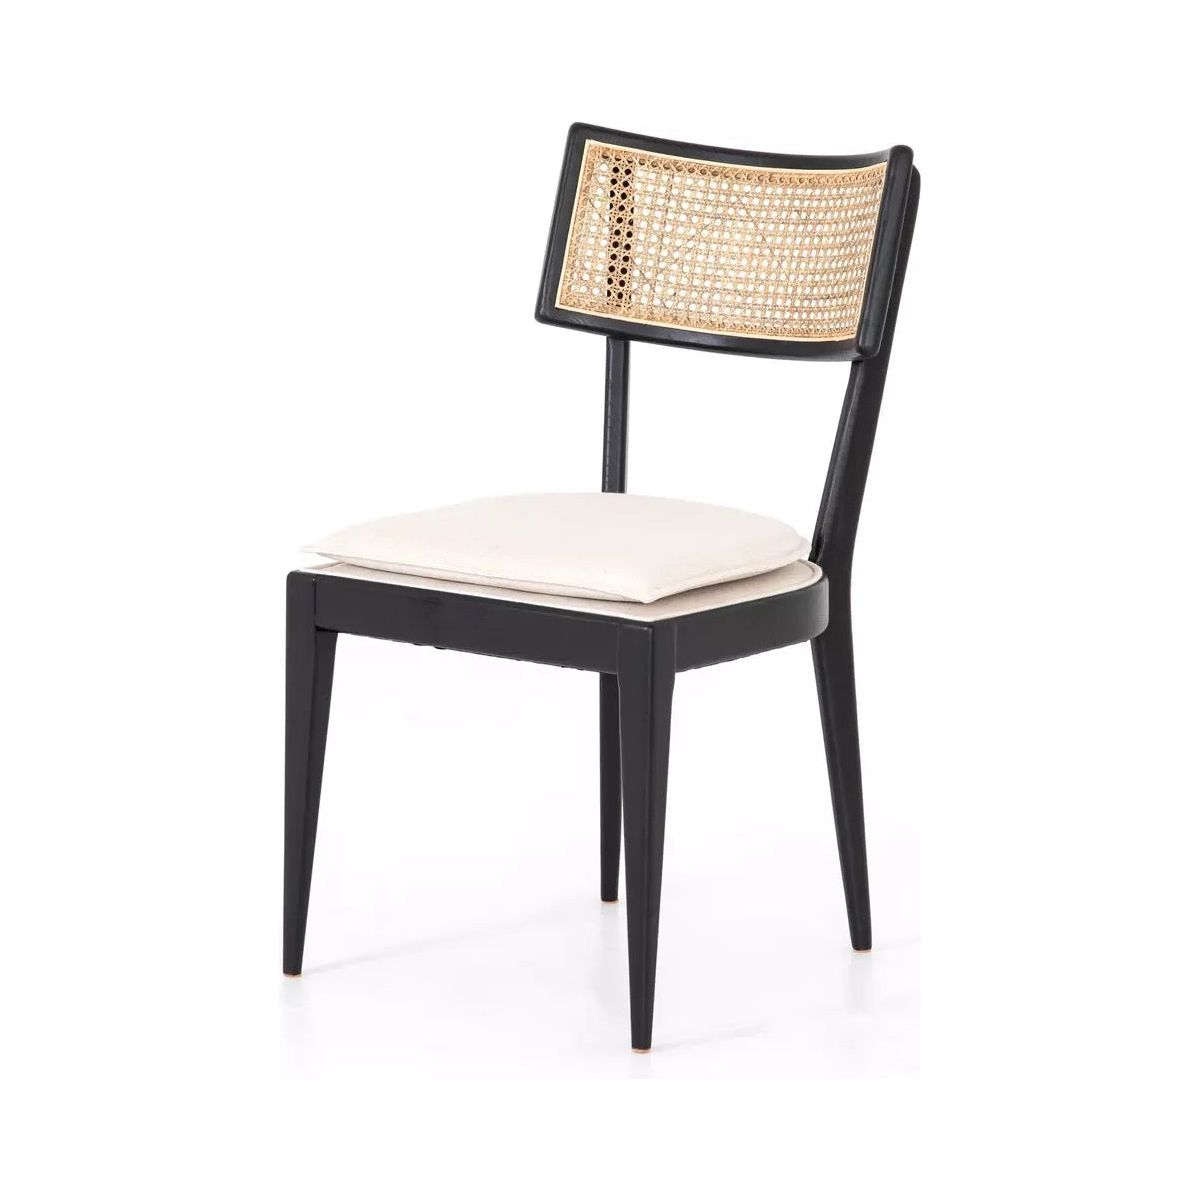 A Britt Dining Chair with an ebony-finished nettlewood frame, featuring a woven rattan backrest. The high-performance linen-blend seating adds comfort and durability. The chair has sleek, slightly tapered legs and a minimalist design, blending contemporary and natural elements seamlessly.